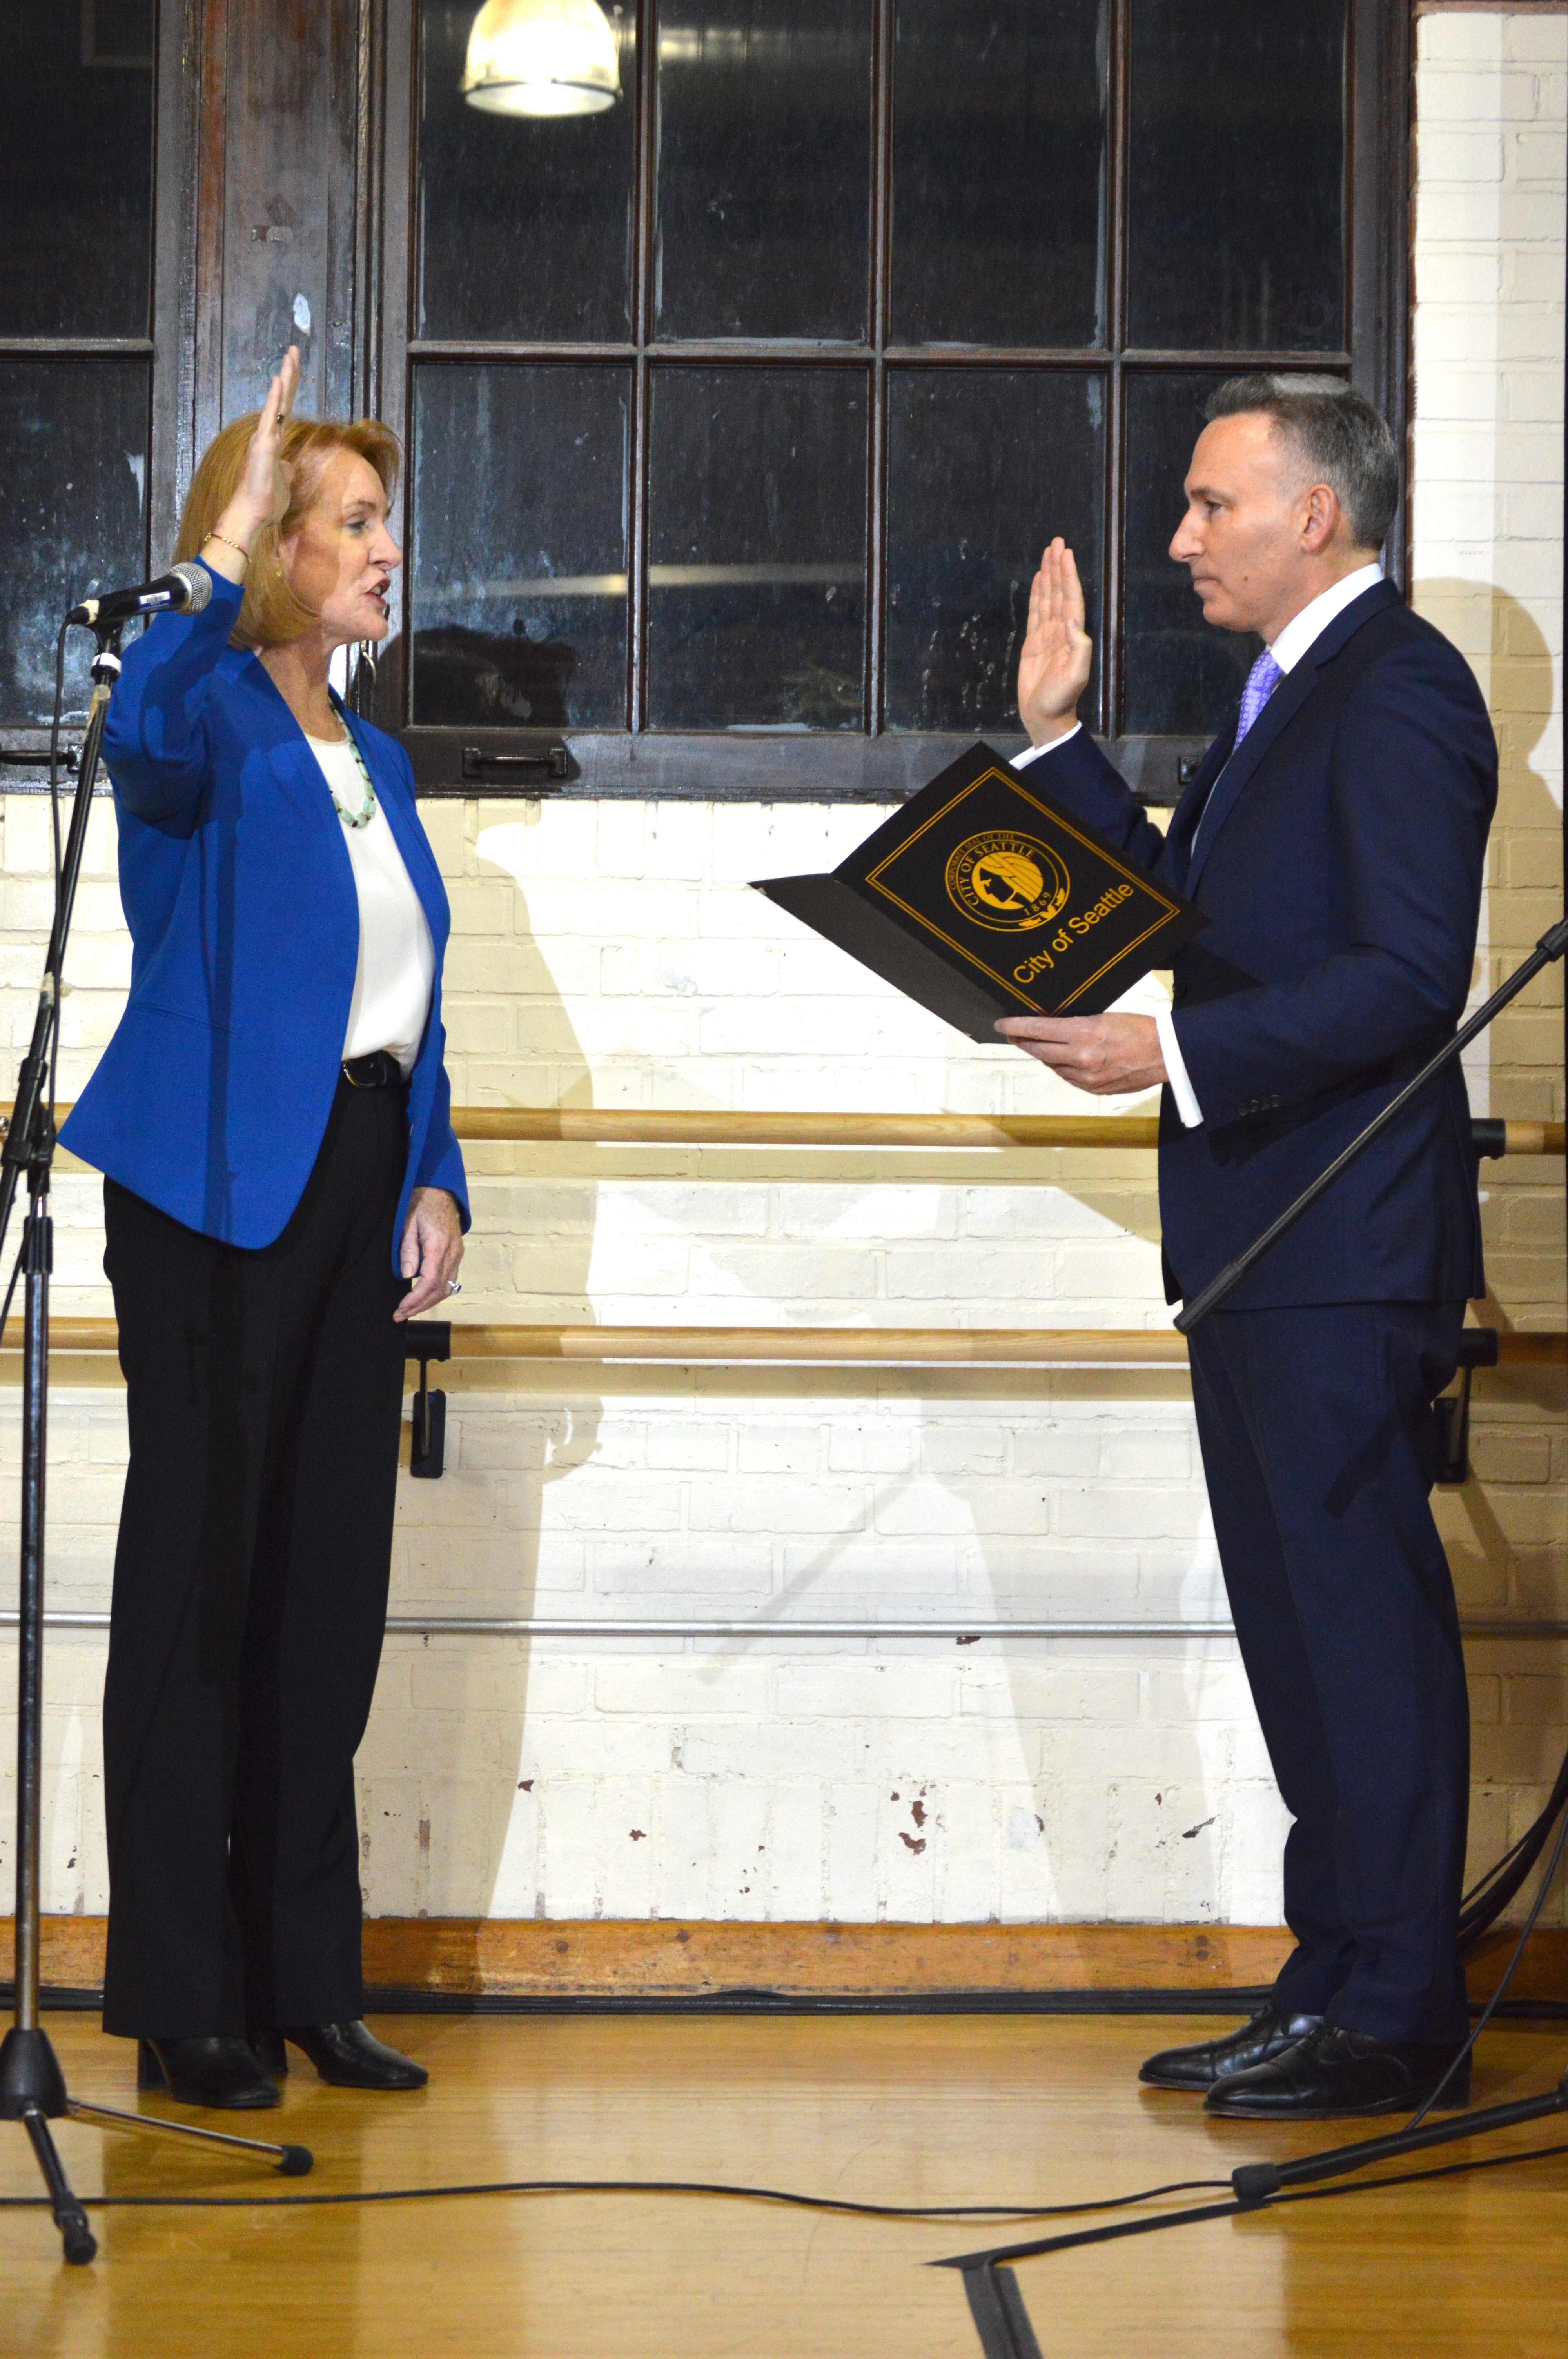 Durkan was sworn in by West Seattle resident, King County Executive Dow Constantine